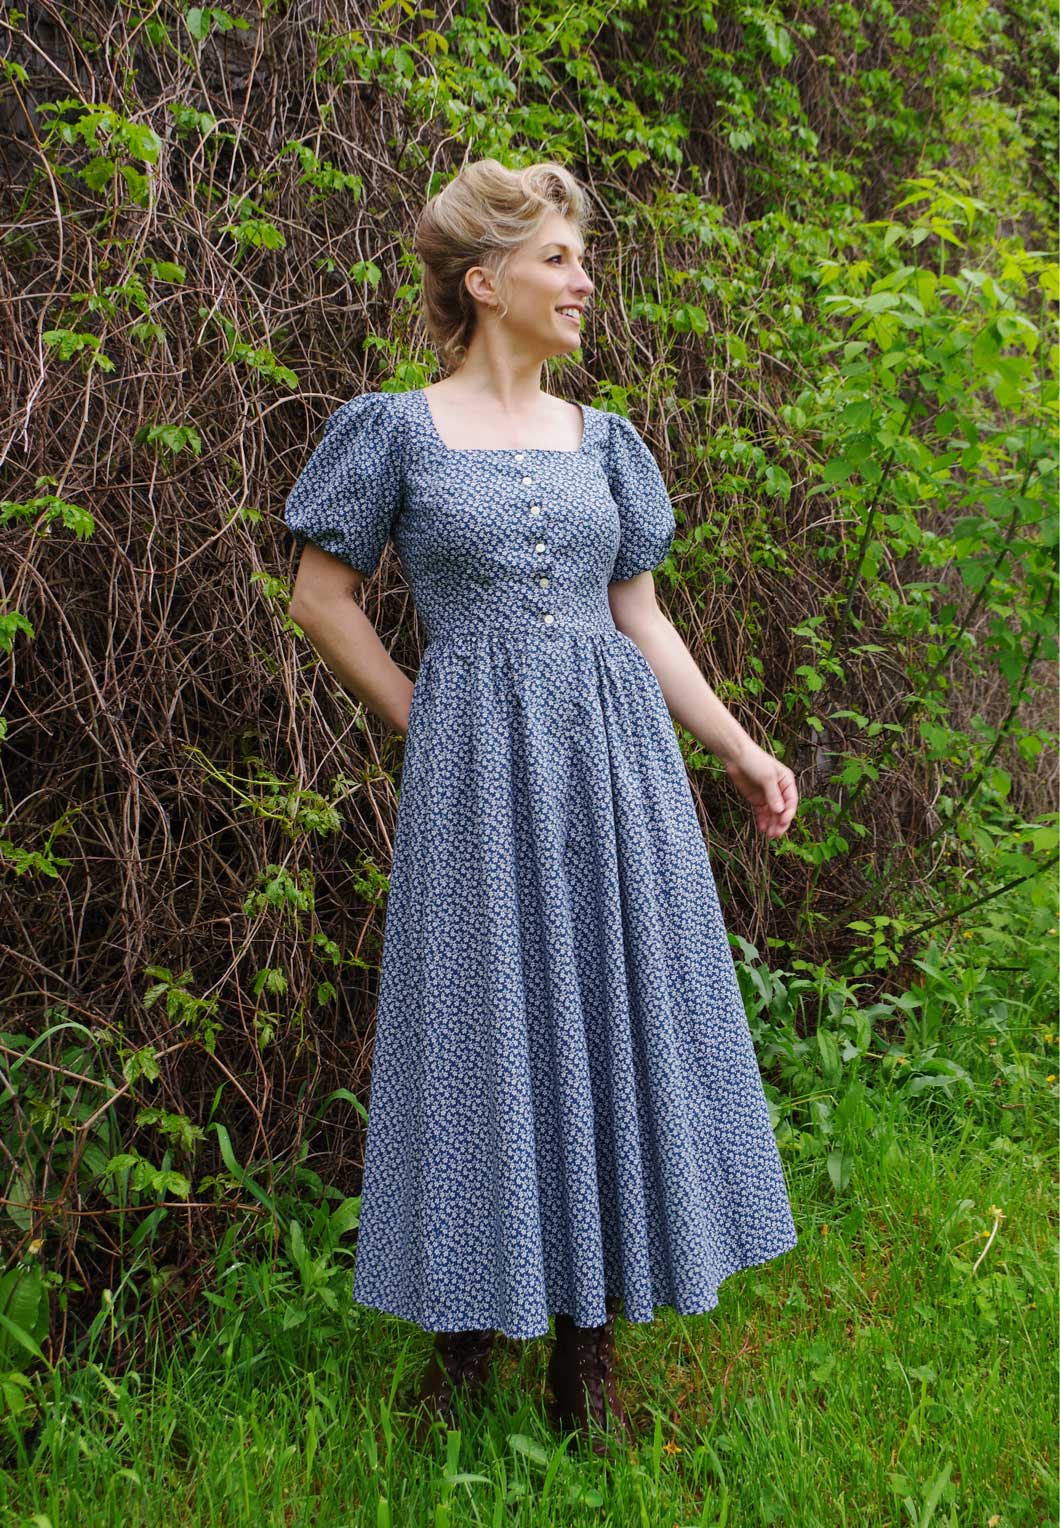 This Victorian style dress please! : r/findfashion